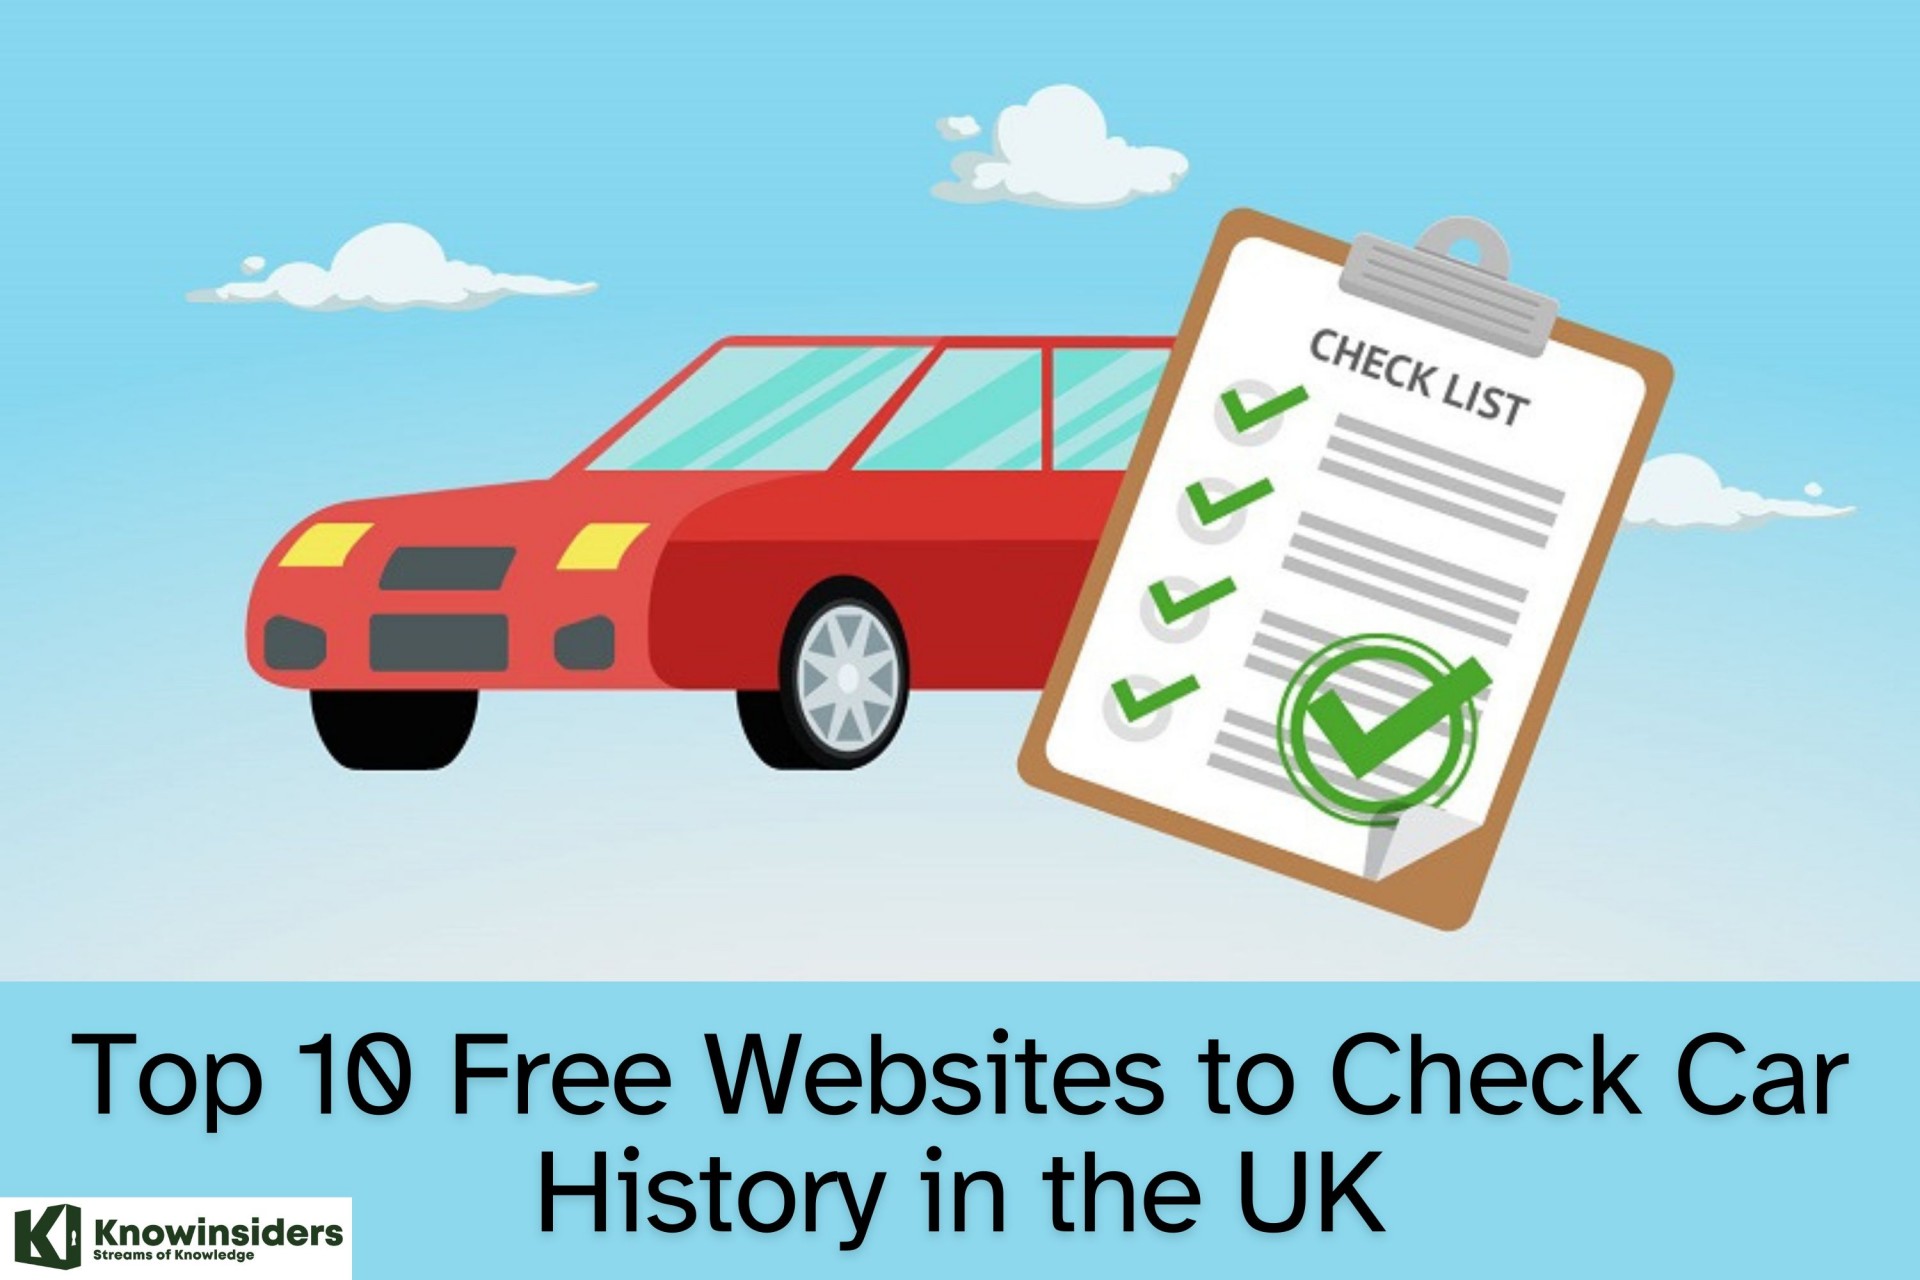 How to Check A Car History in the U.K - 10 Best Free Websites for the VIN/VRN/MOT